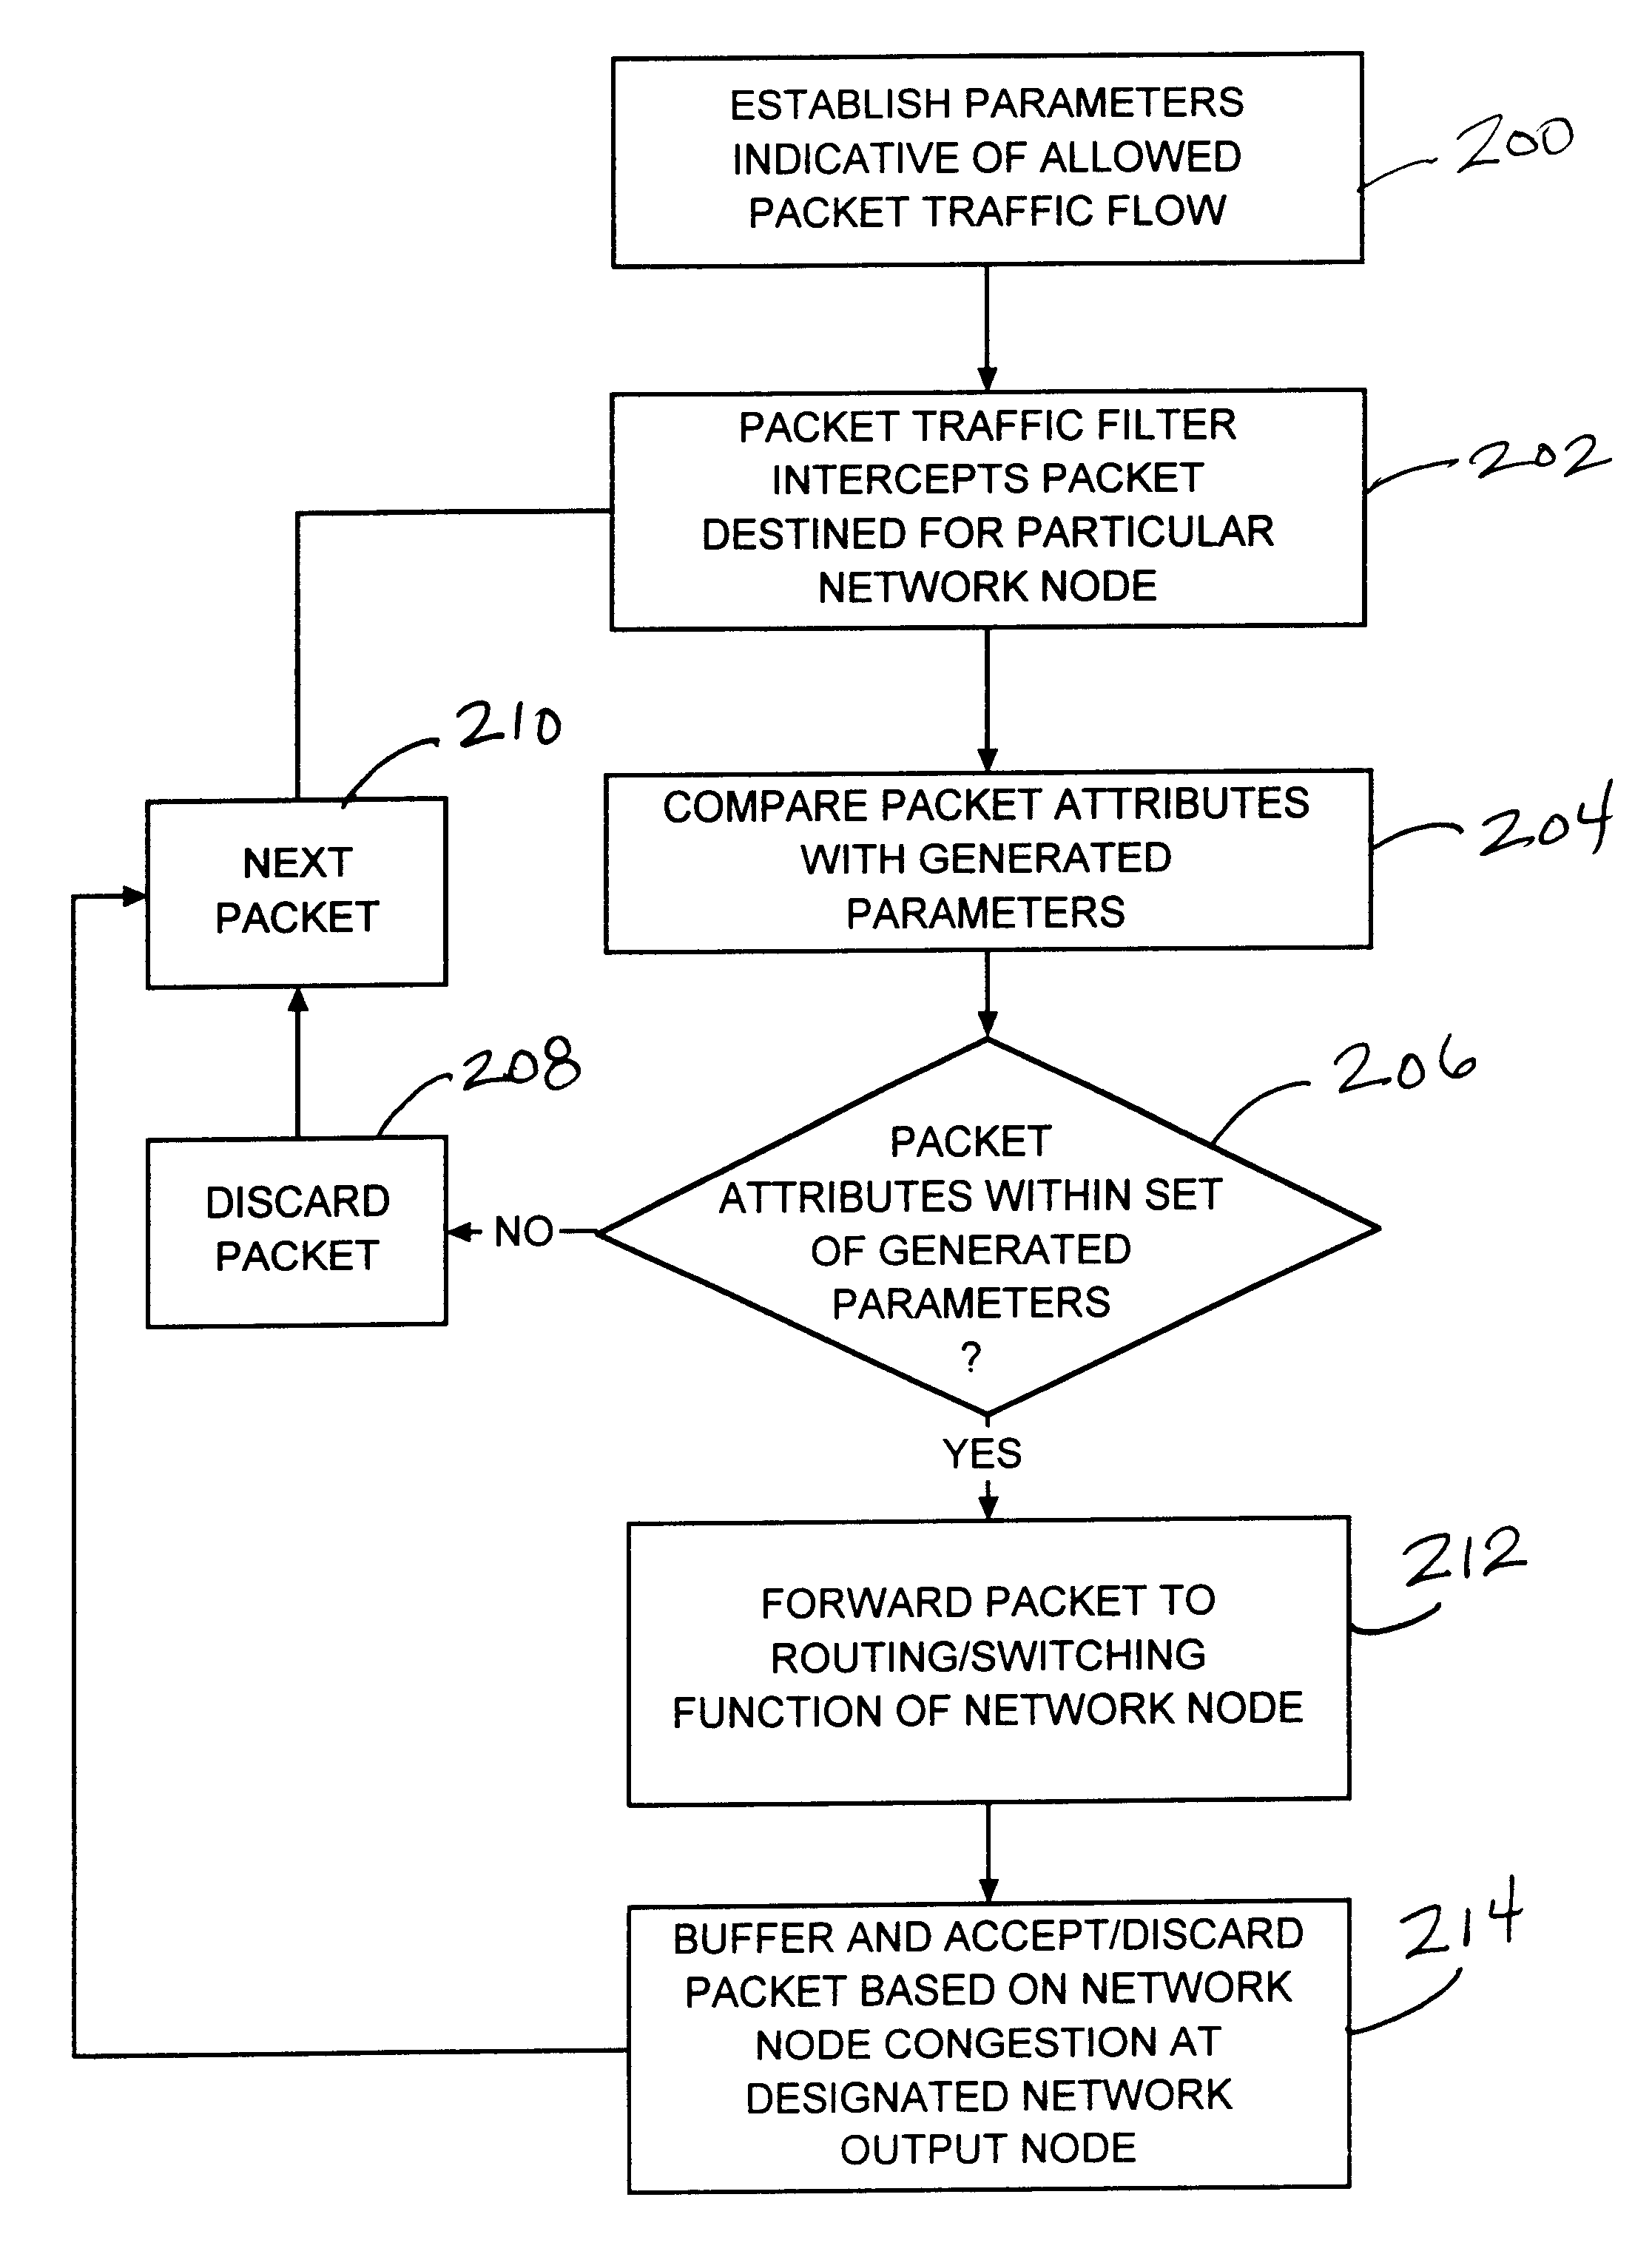 System and method for pre-filtering low priority packets at network nodes in a network service class utilizing a priority-based quality of service